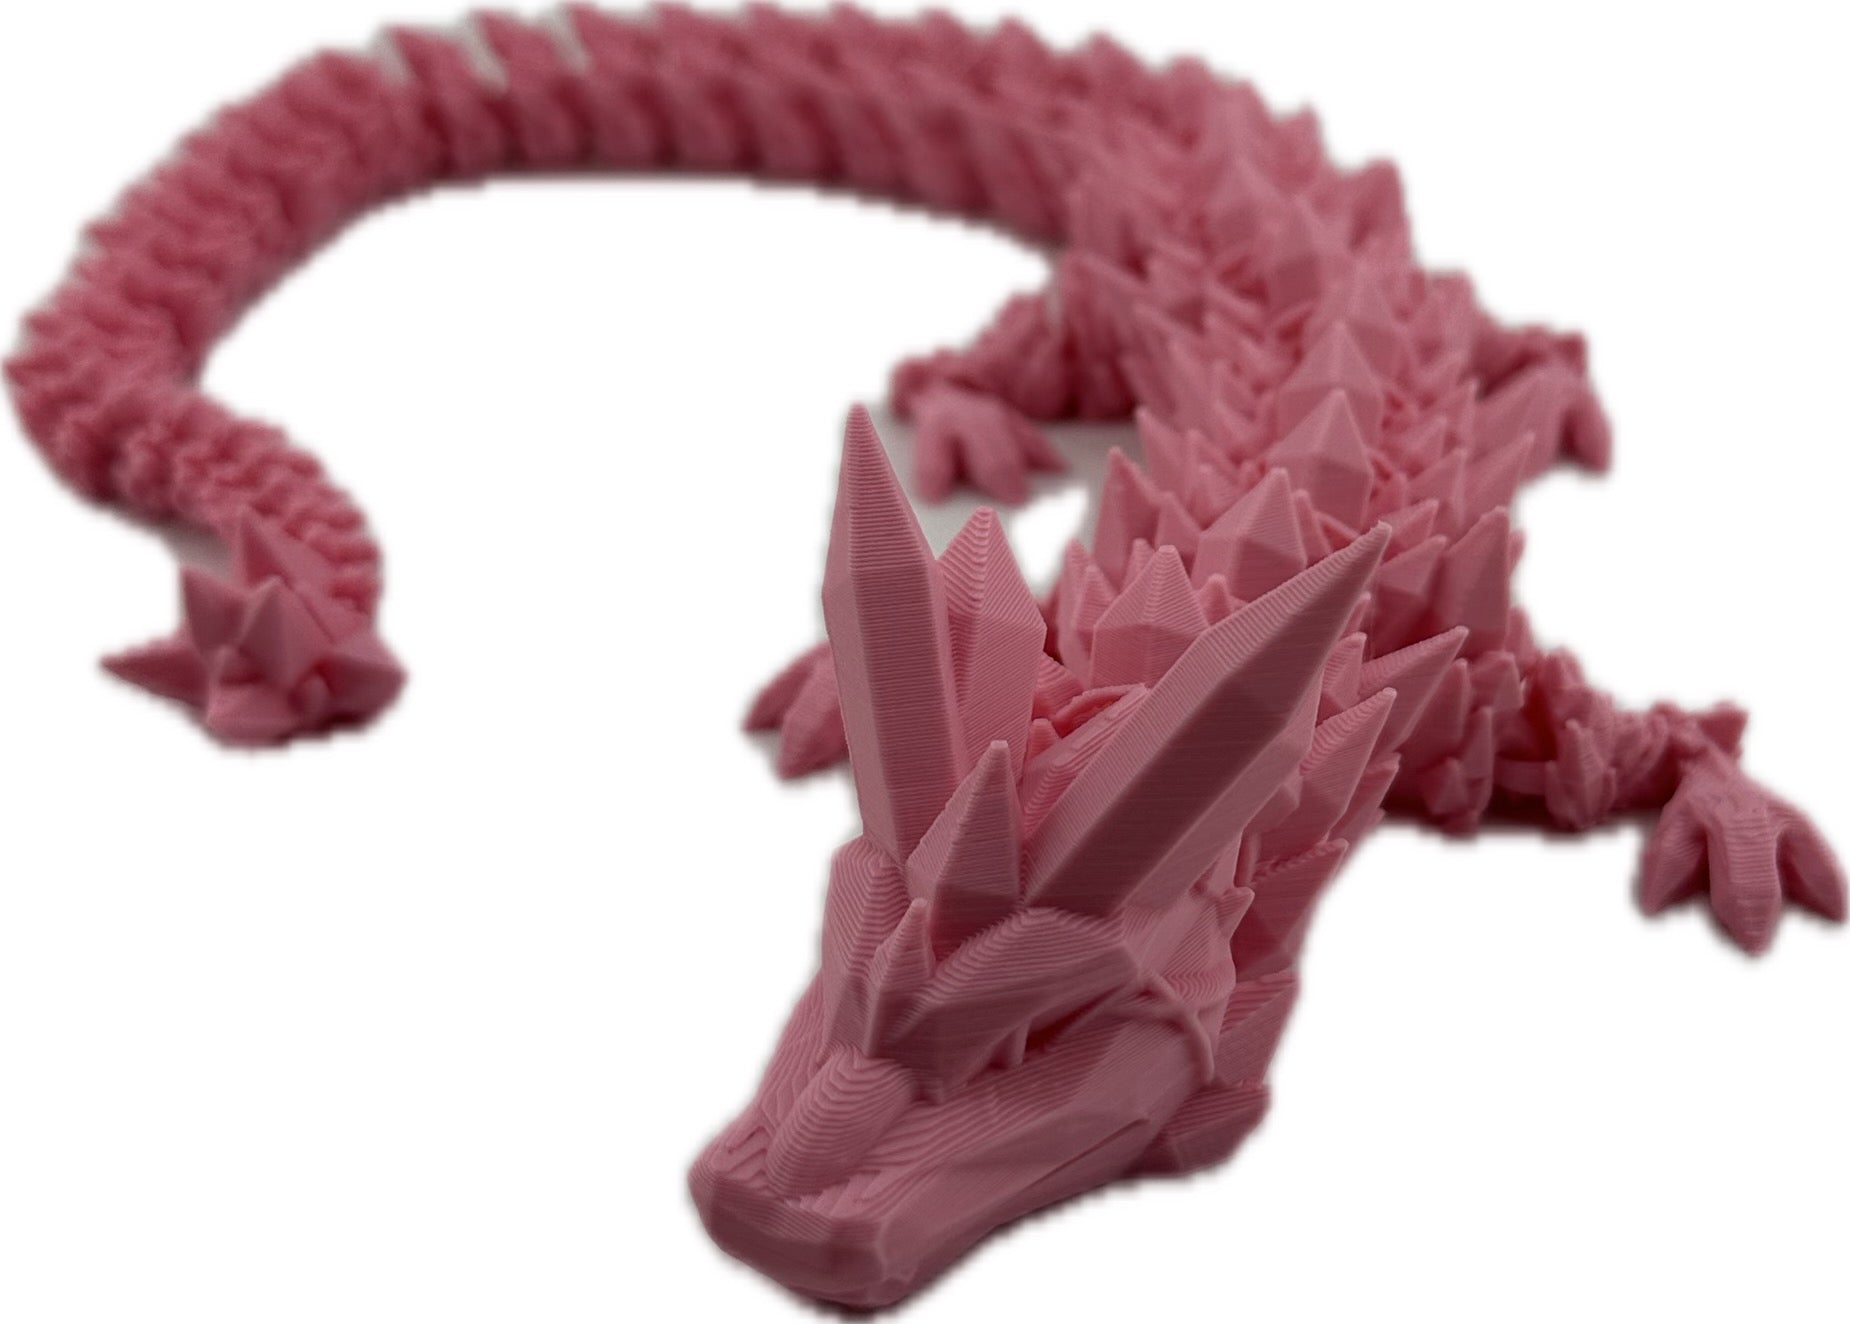 GIANT 3D Printed Crystal Dragon With Wings Articulated Fidget Desk Toy Gift  